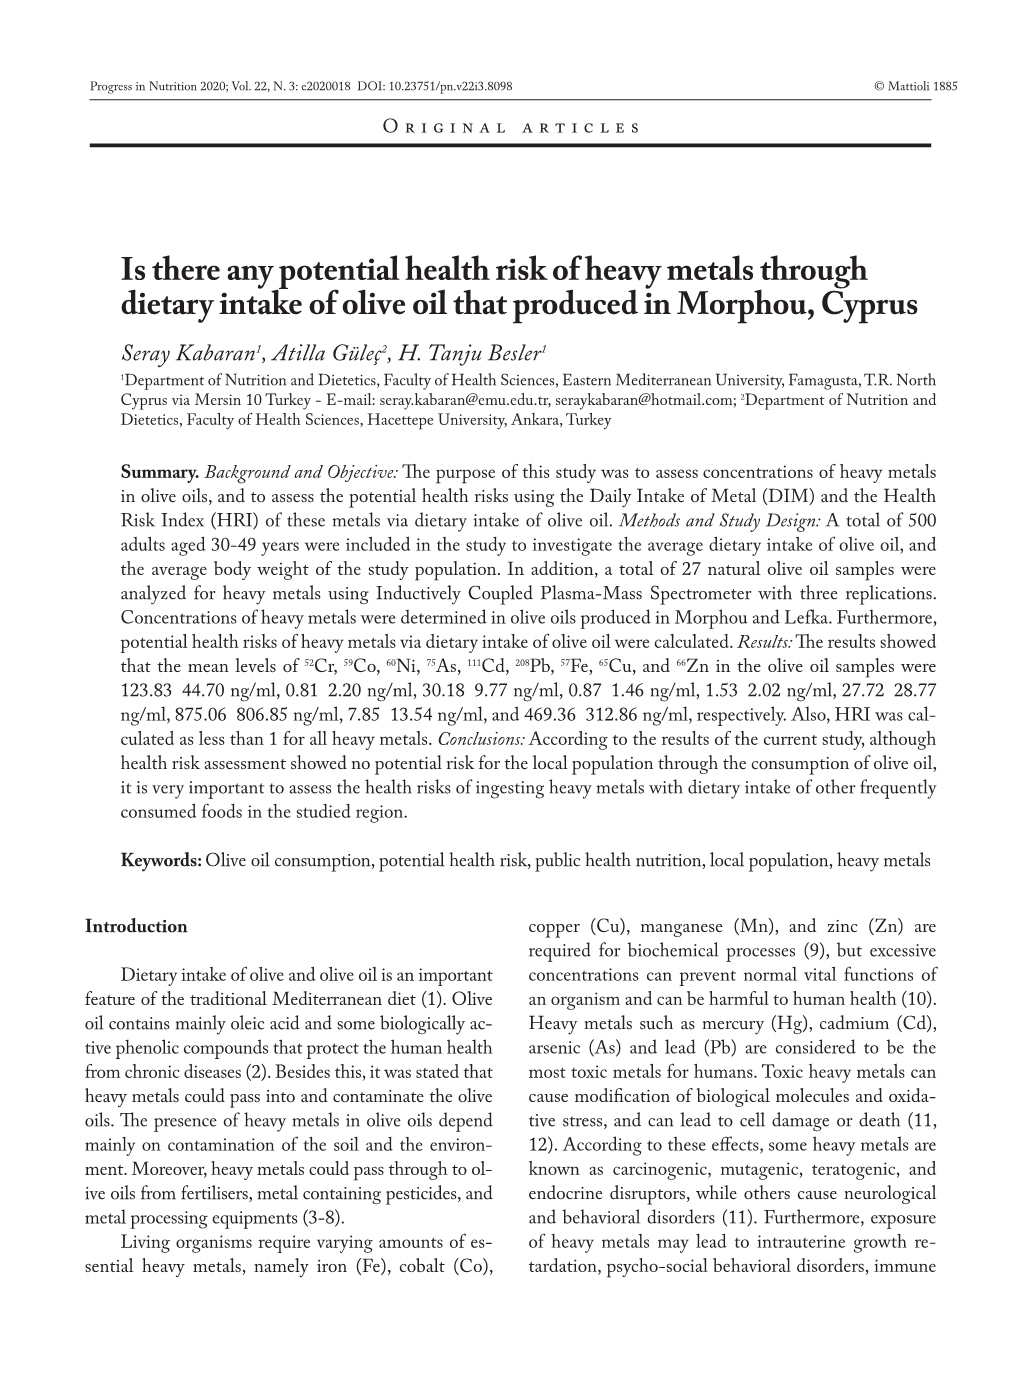 Is There Any Potential Health Risk of Heavy Metals Through Dietary Intake of Olive Oil That Produced in Morphou, Cyprus Seray Kabaran1, Atilla Güleç2, H